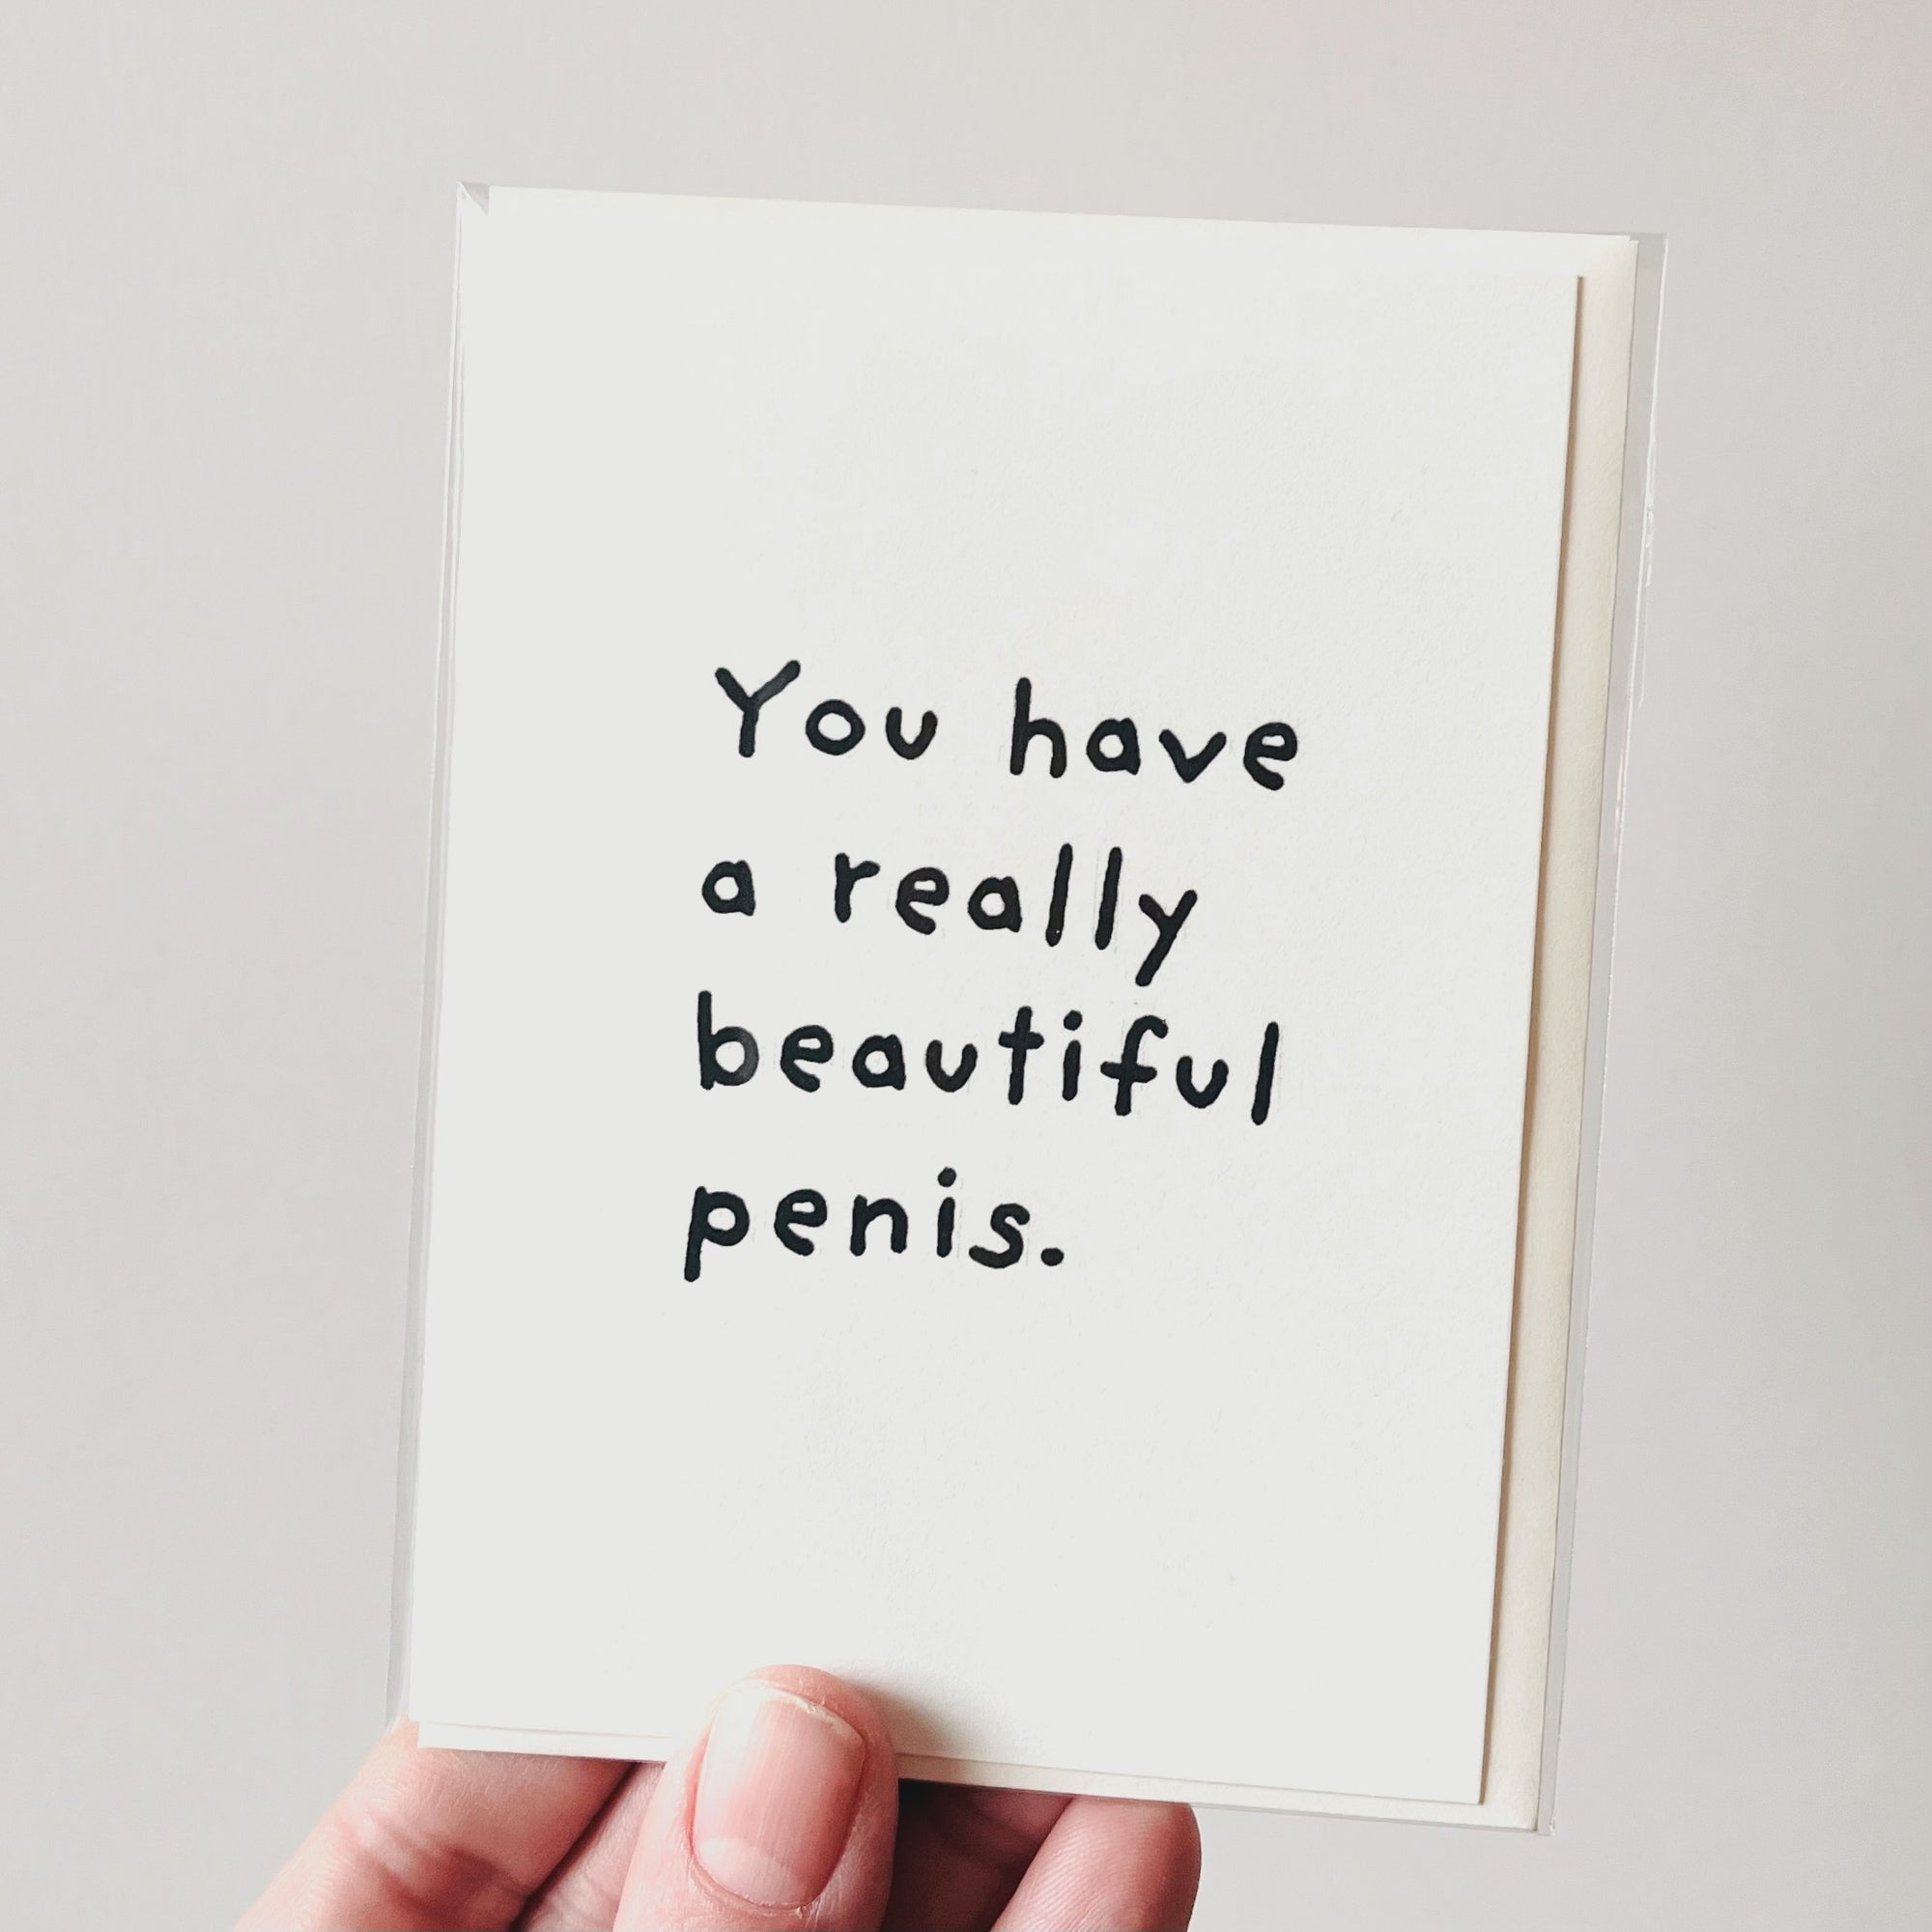 You have a really beautiful penis.